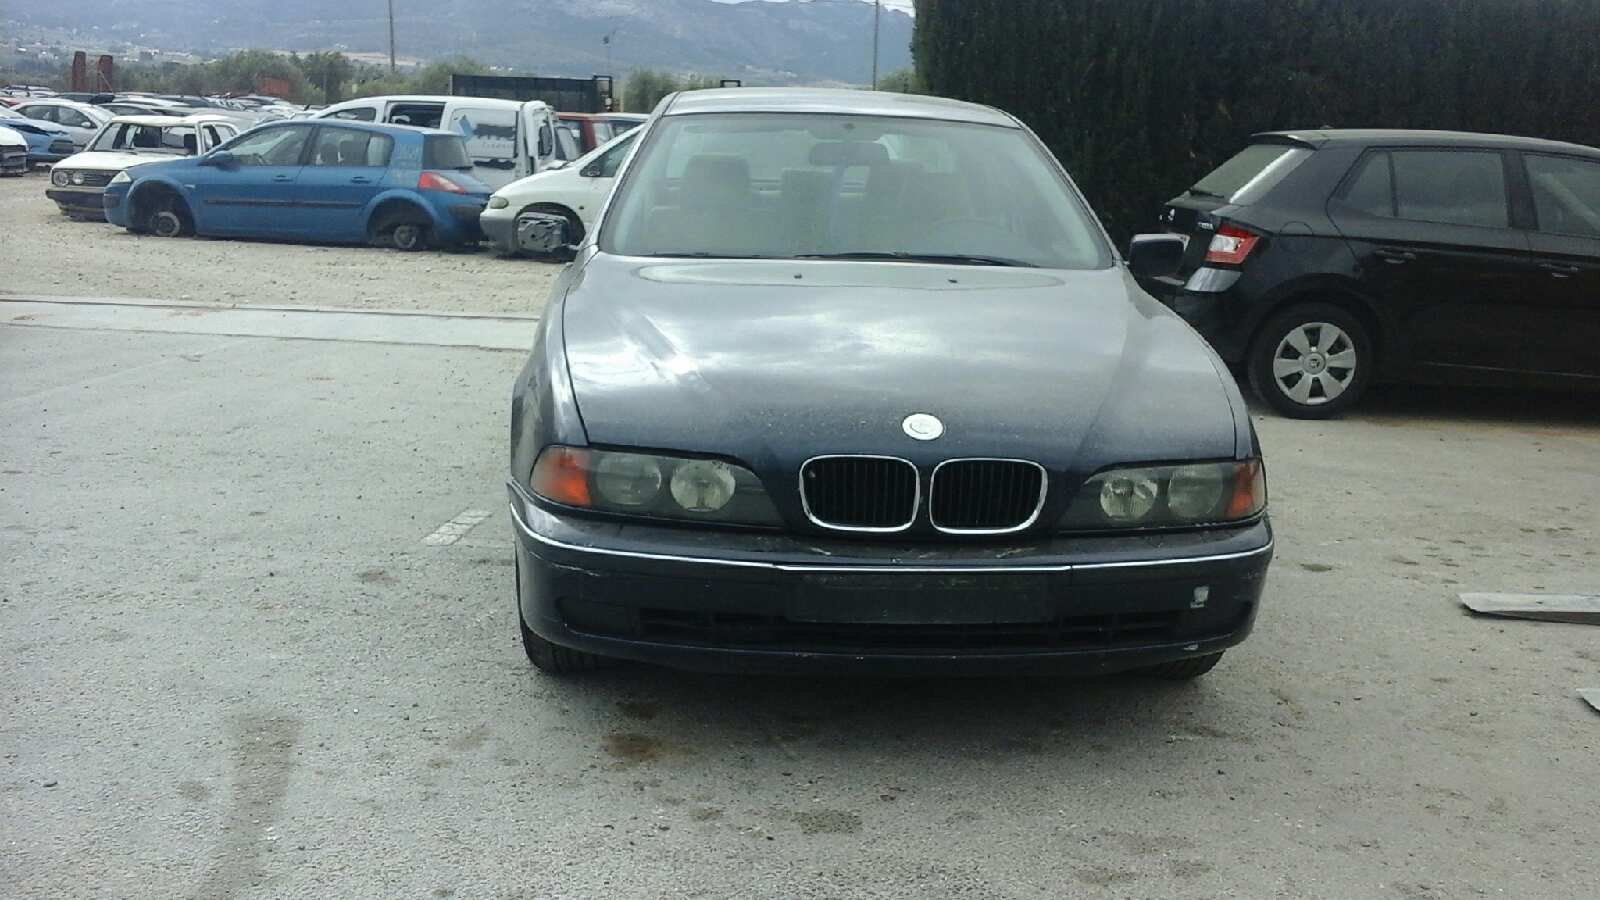 BMW 5 Series E39 (1995-2004) Other Control Units 1422770, 0260002359 23622699